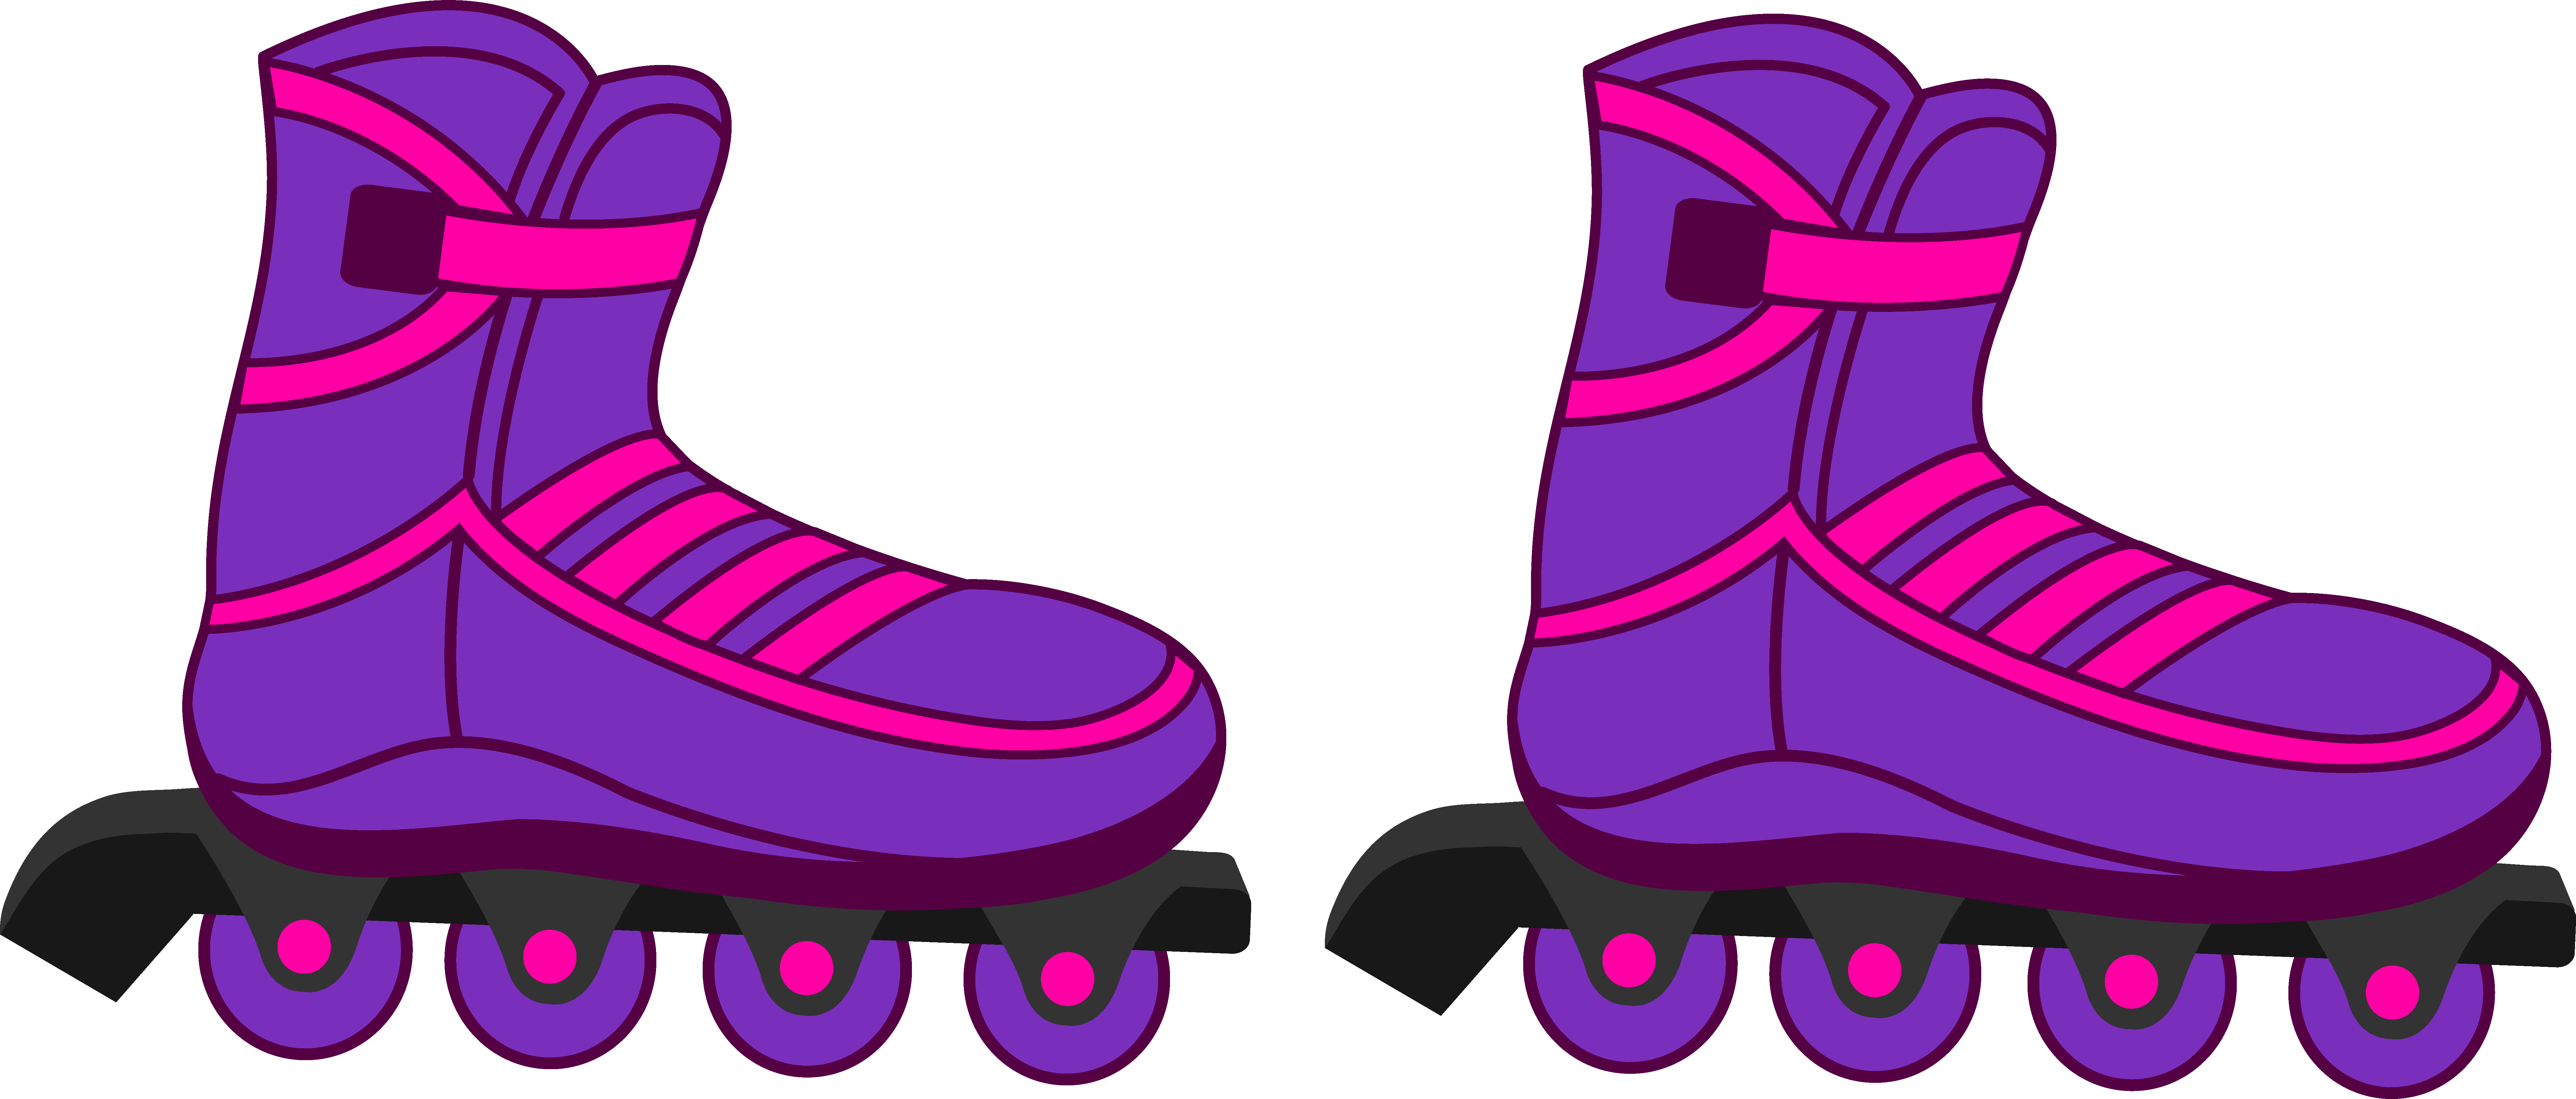 Figurine Clipart Roller Skating - Roller Blades Clipart (8285x3534)